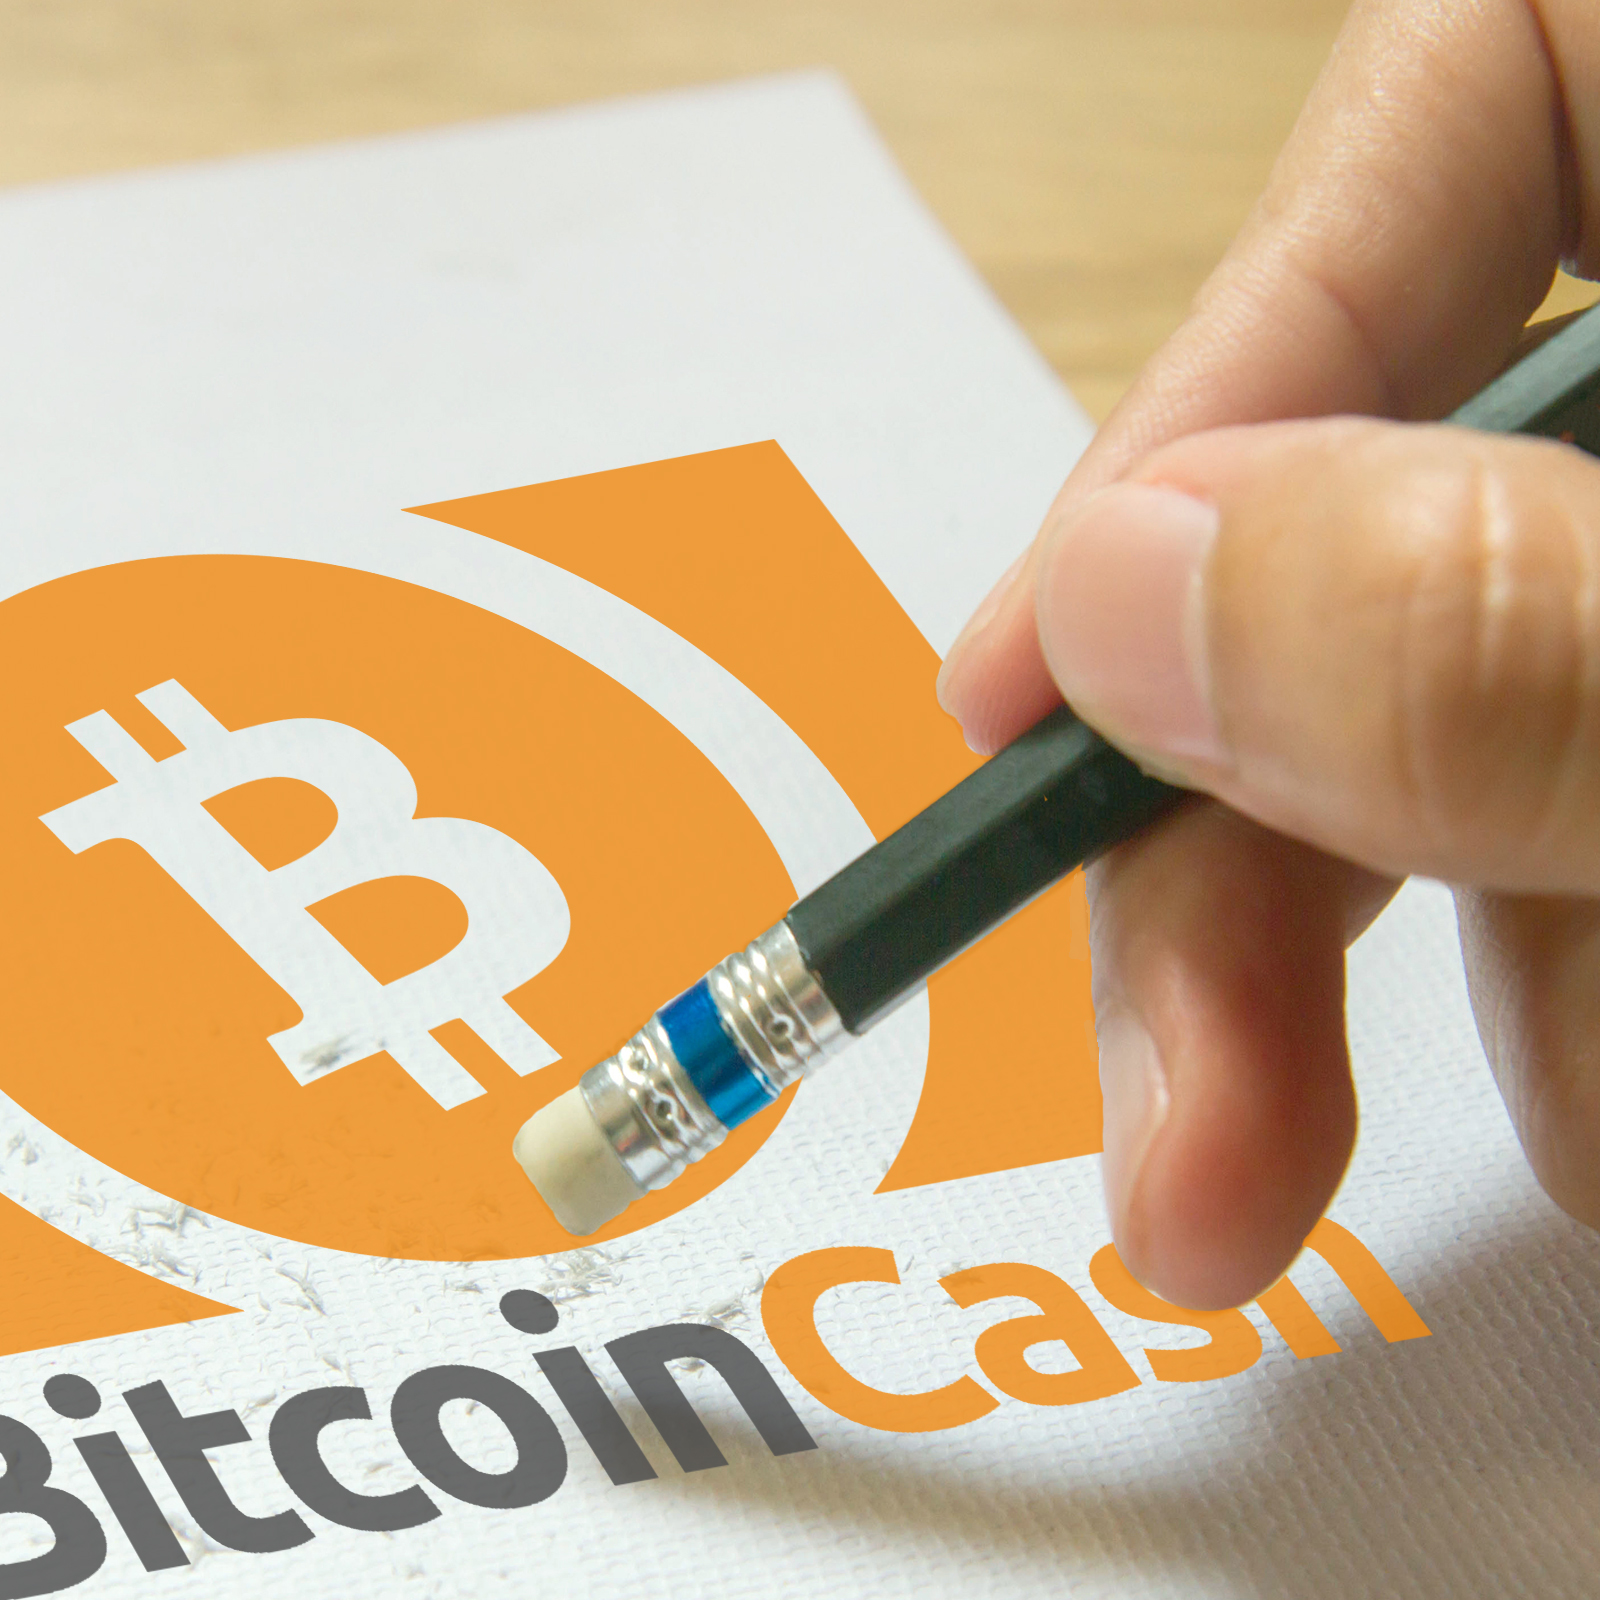 Bitcoin Cash Wiki Article Suffers From Edit Warring and ...